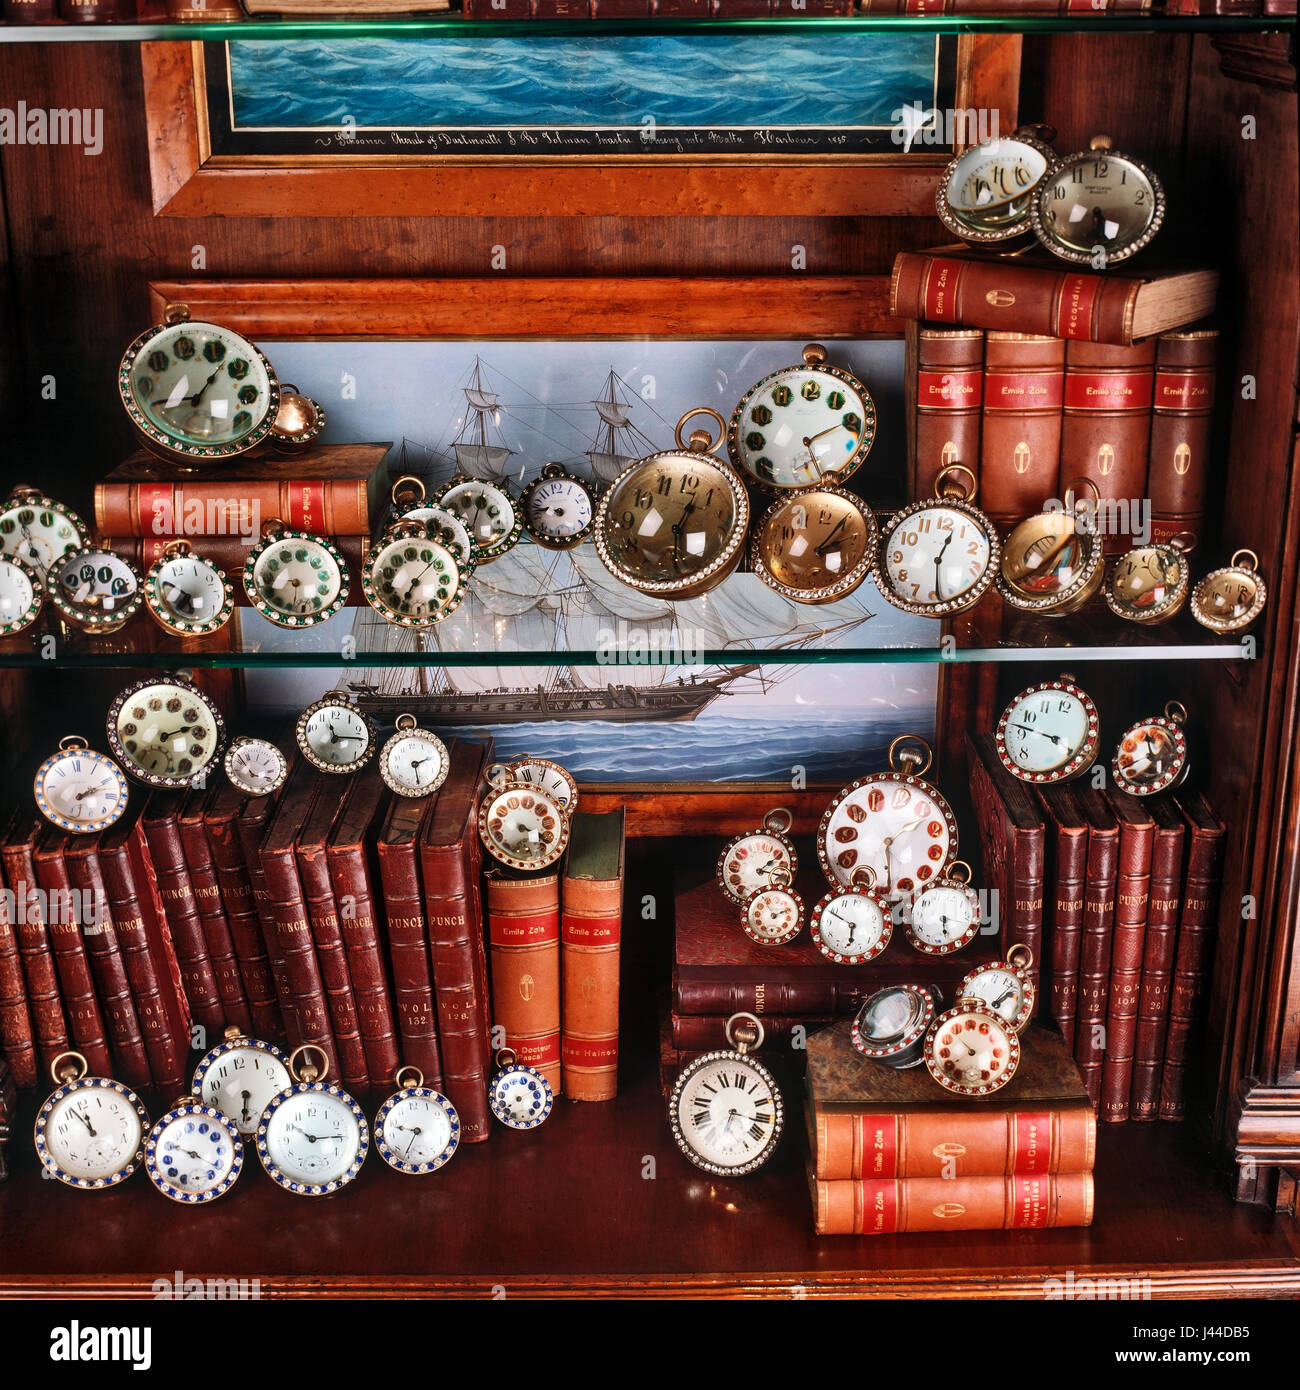 Late 19th century glass ball clocks with leather-bound books surrounds made with coloured paste stones Stock Photo